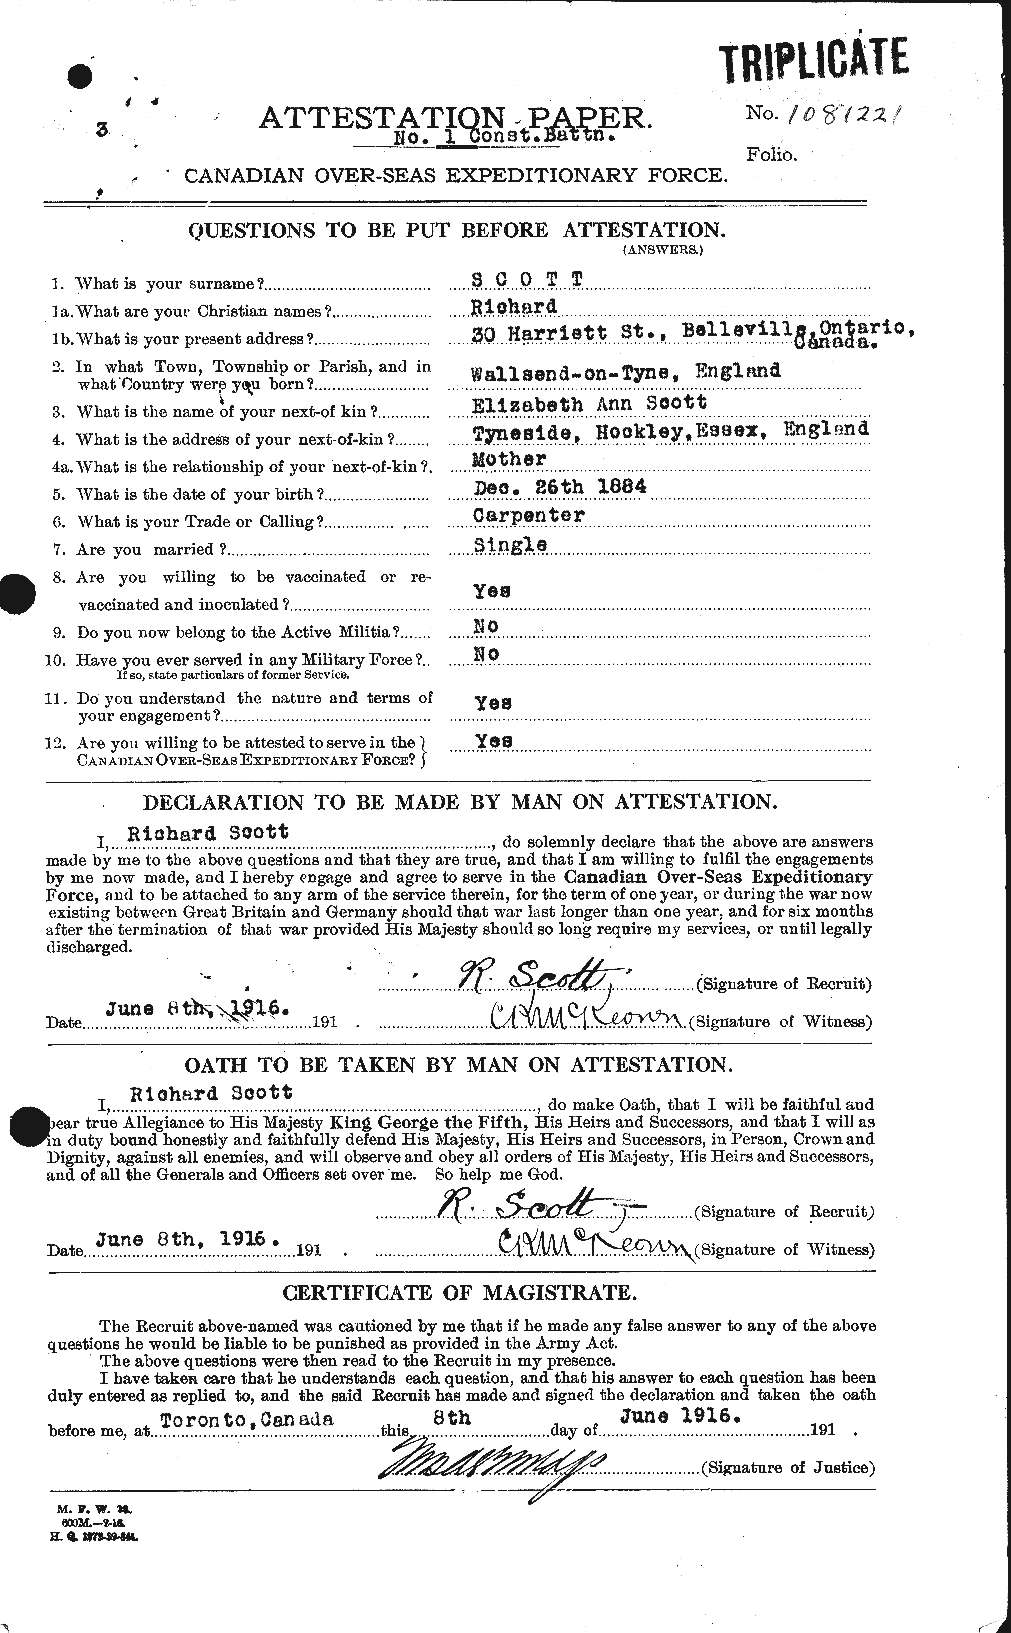 Personnel Records of the First World War - CEF 090183a